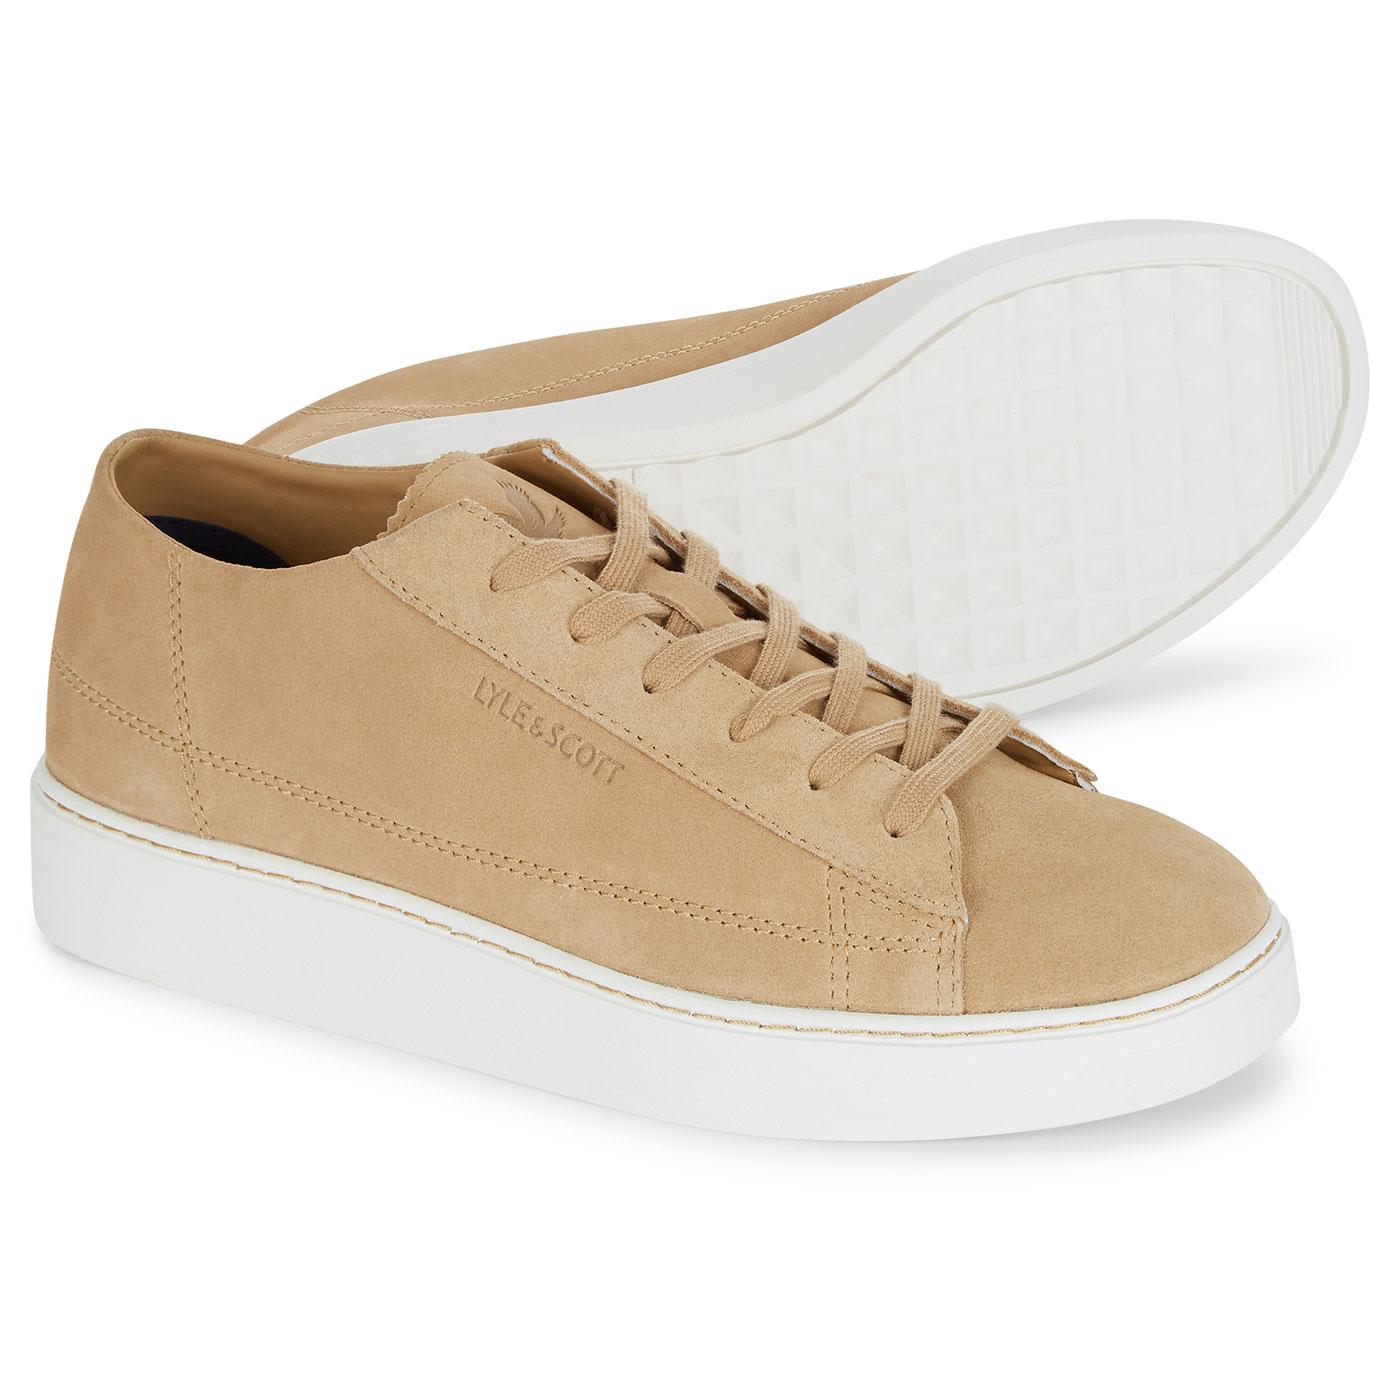 Shankly LYLE & SCOTT Retro Suede Trainers TAN